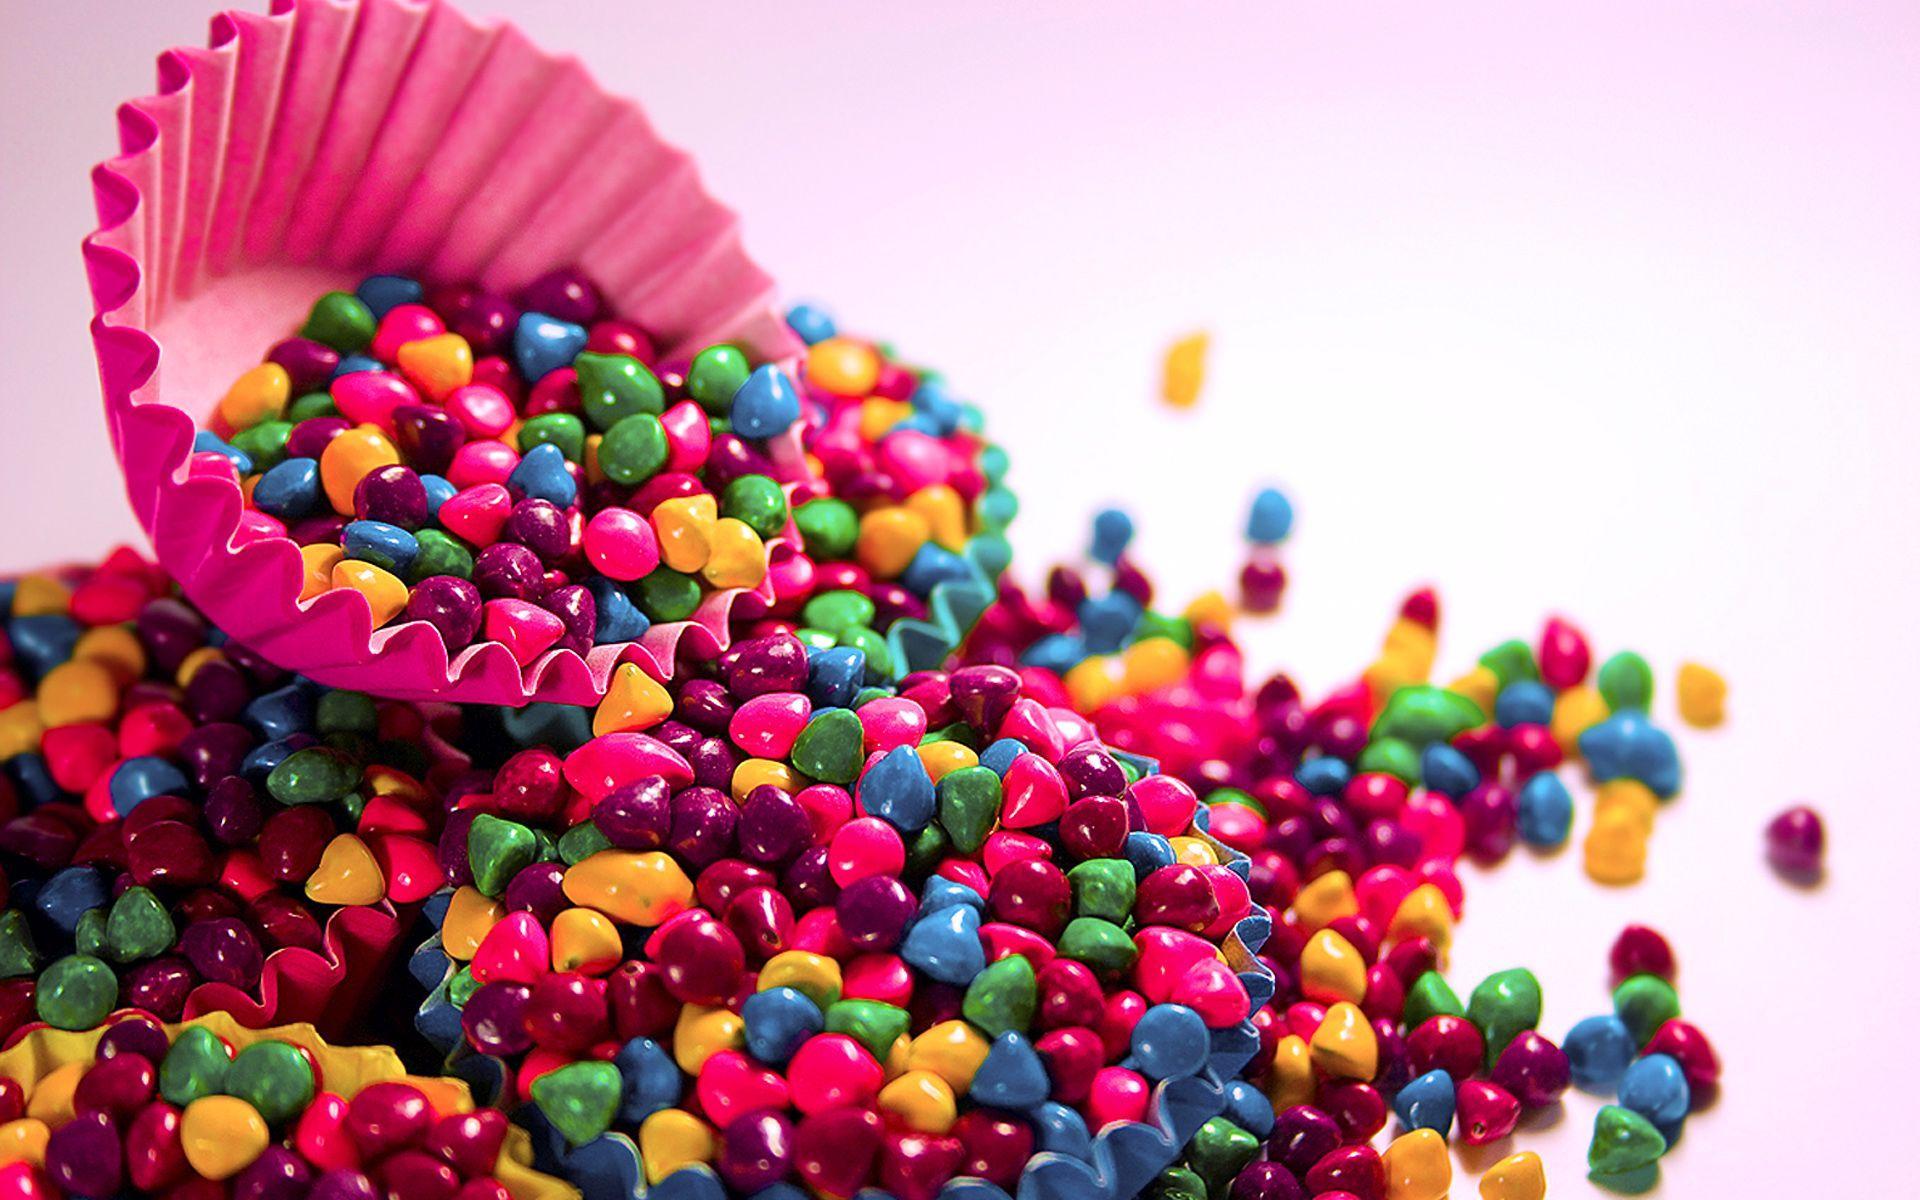 Colorful Candy - Colorful Hd Wallpapers Cute - HD Wallpaper 